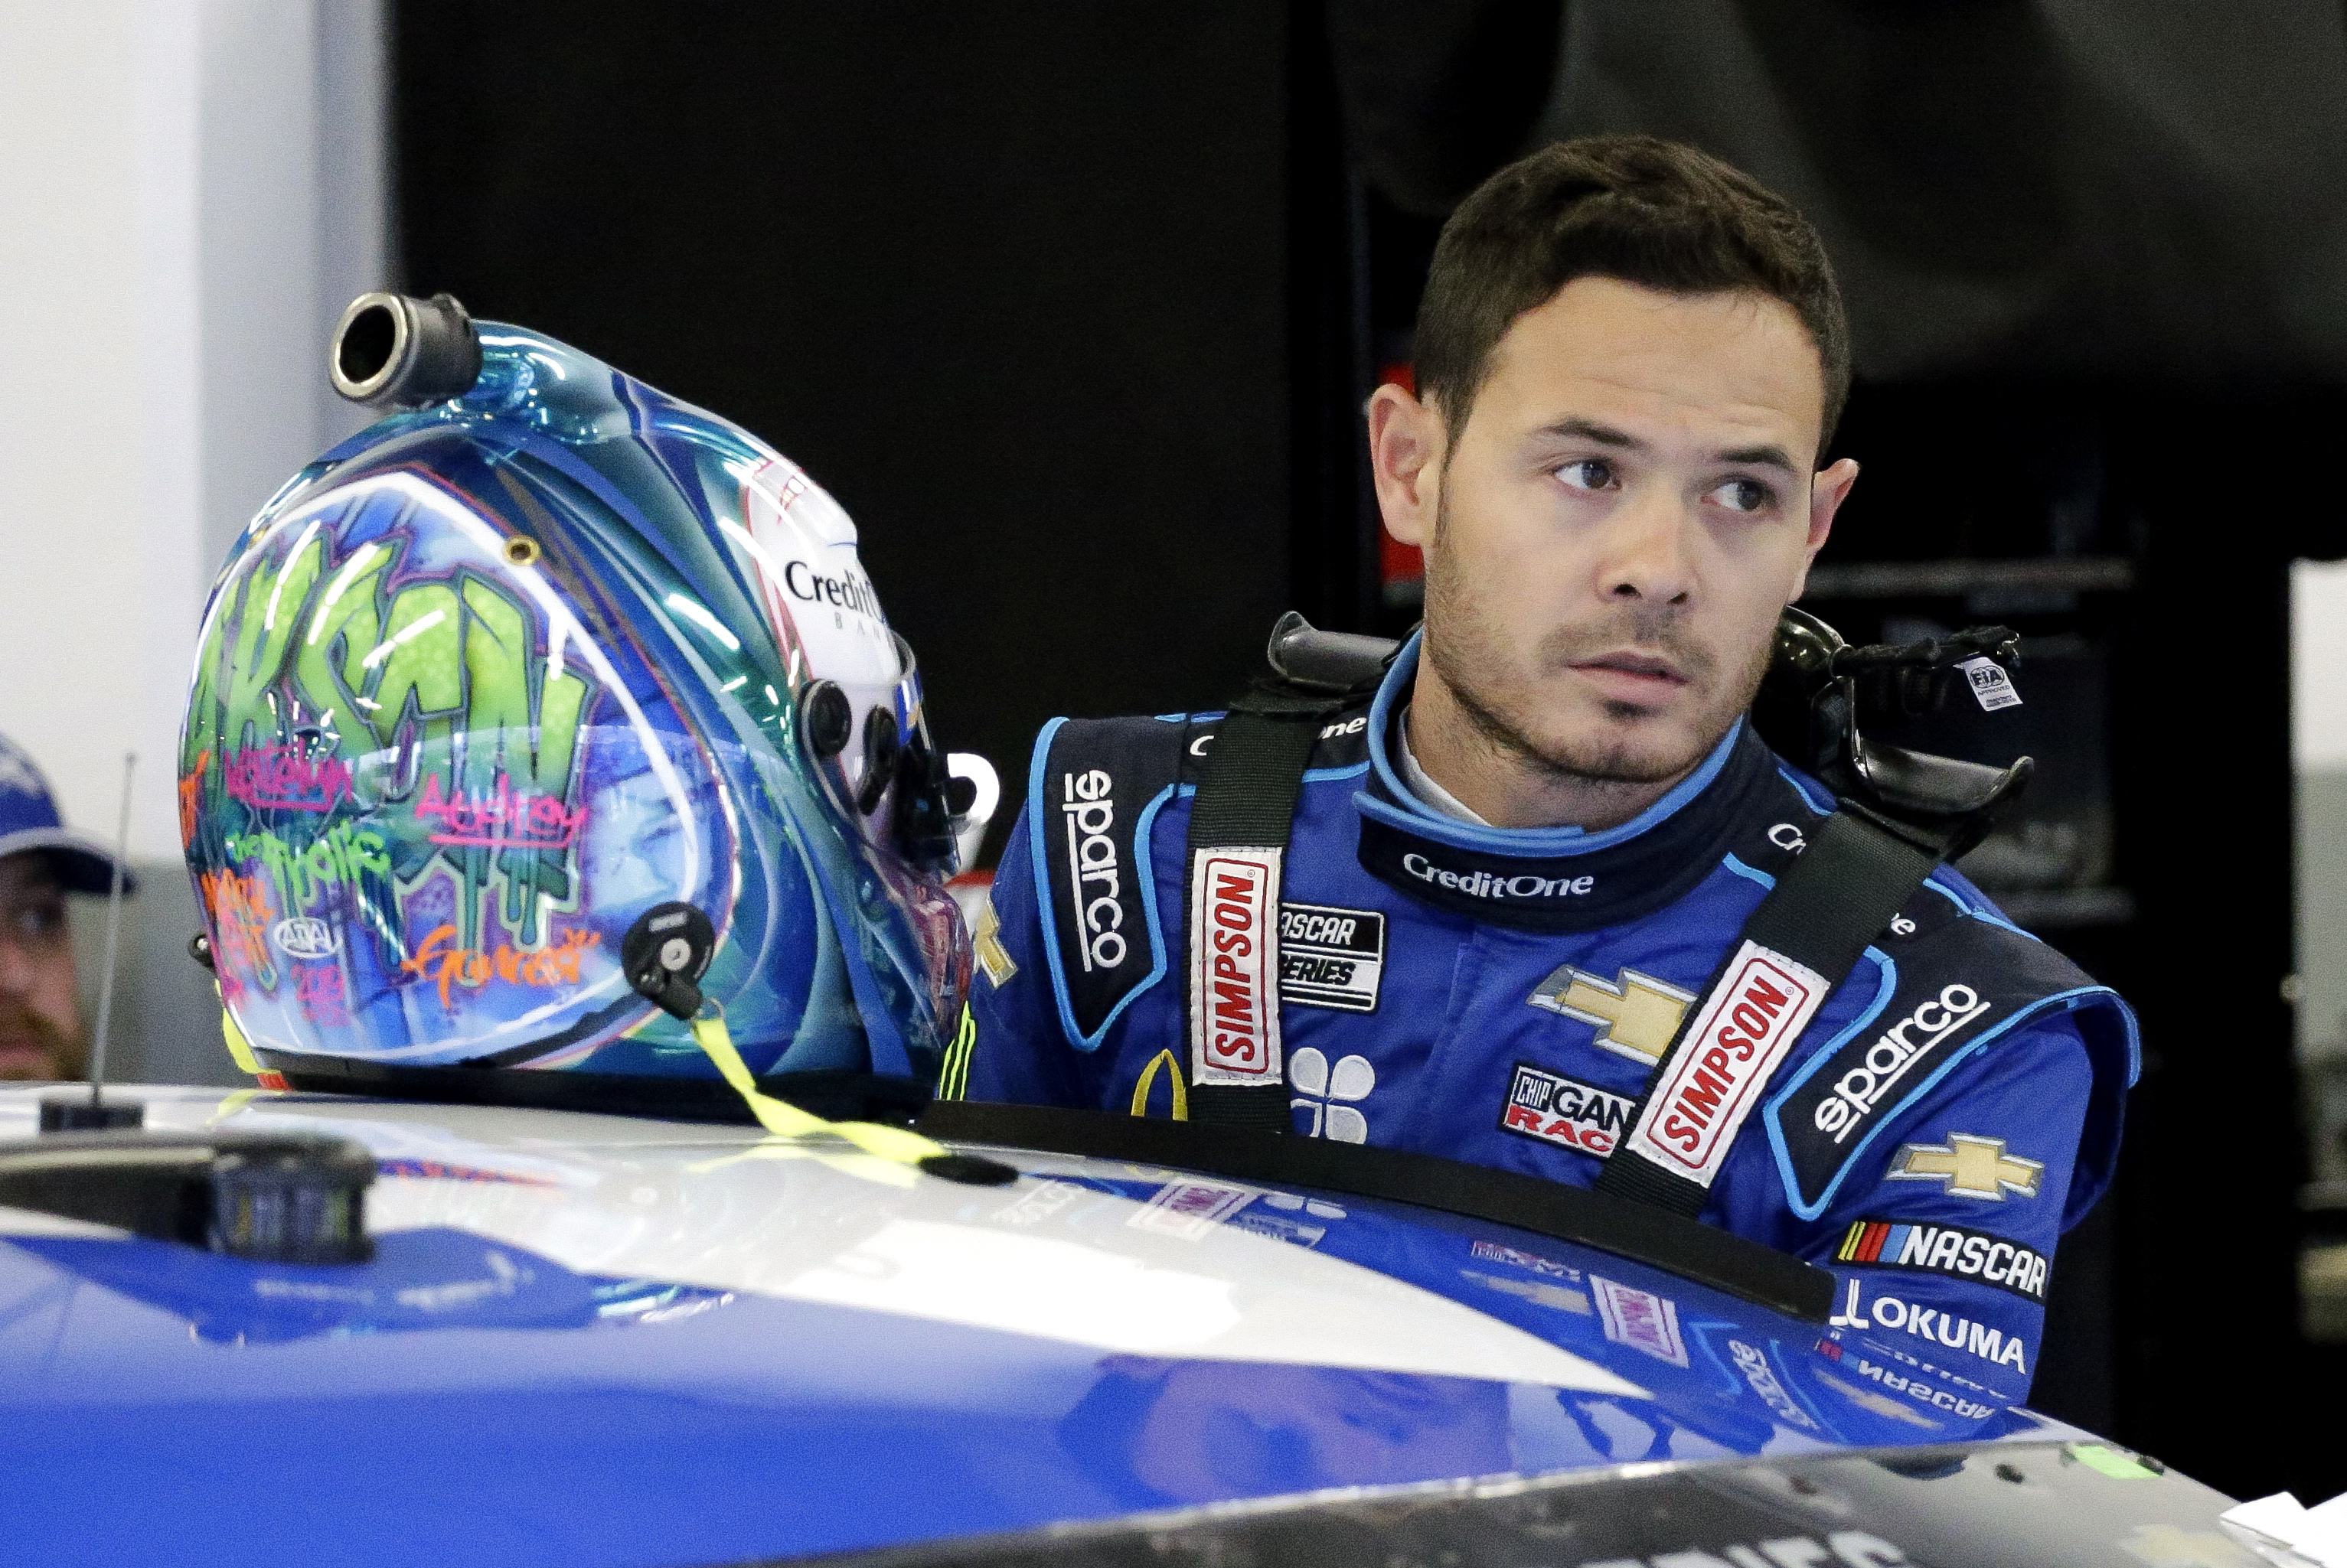 NASCAR driver Kyle Larson fired from Chip Ganassi Racing after using racial slur during online race